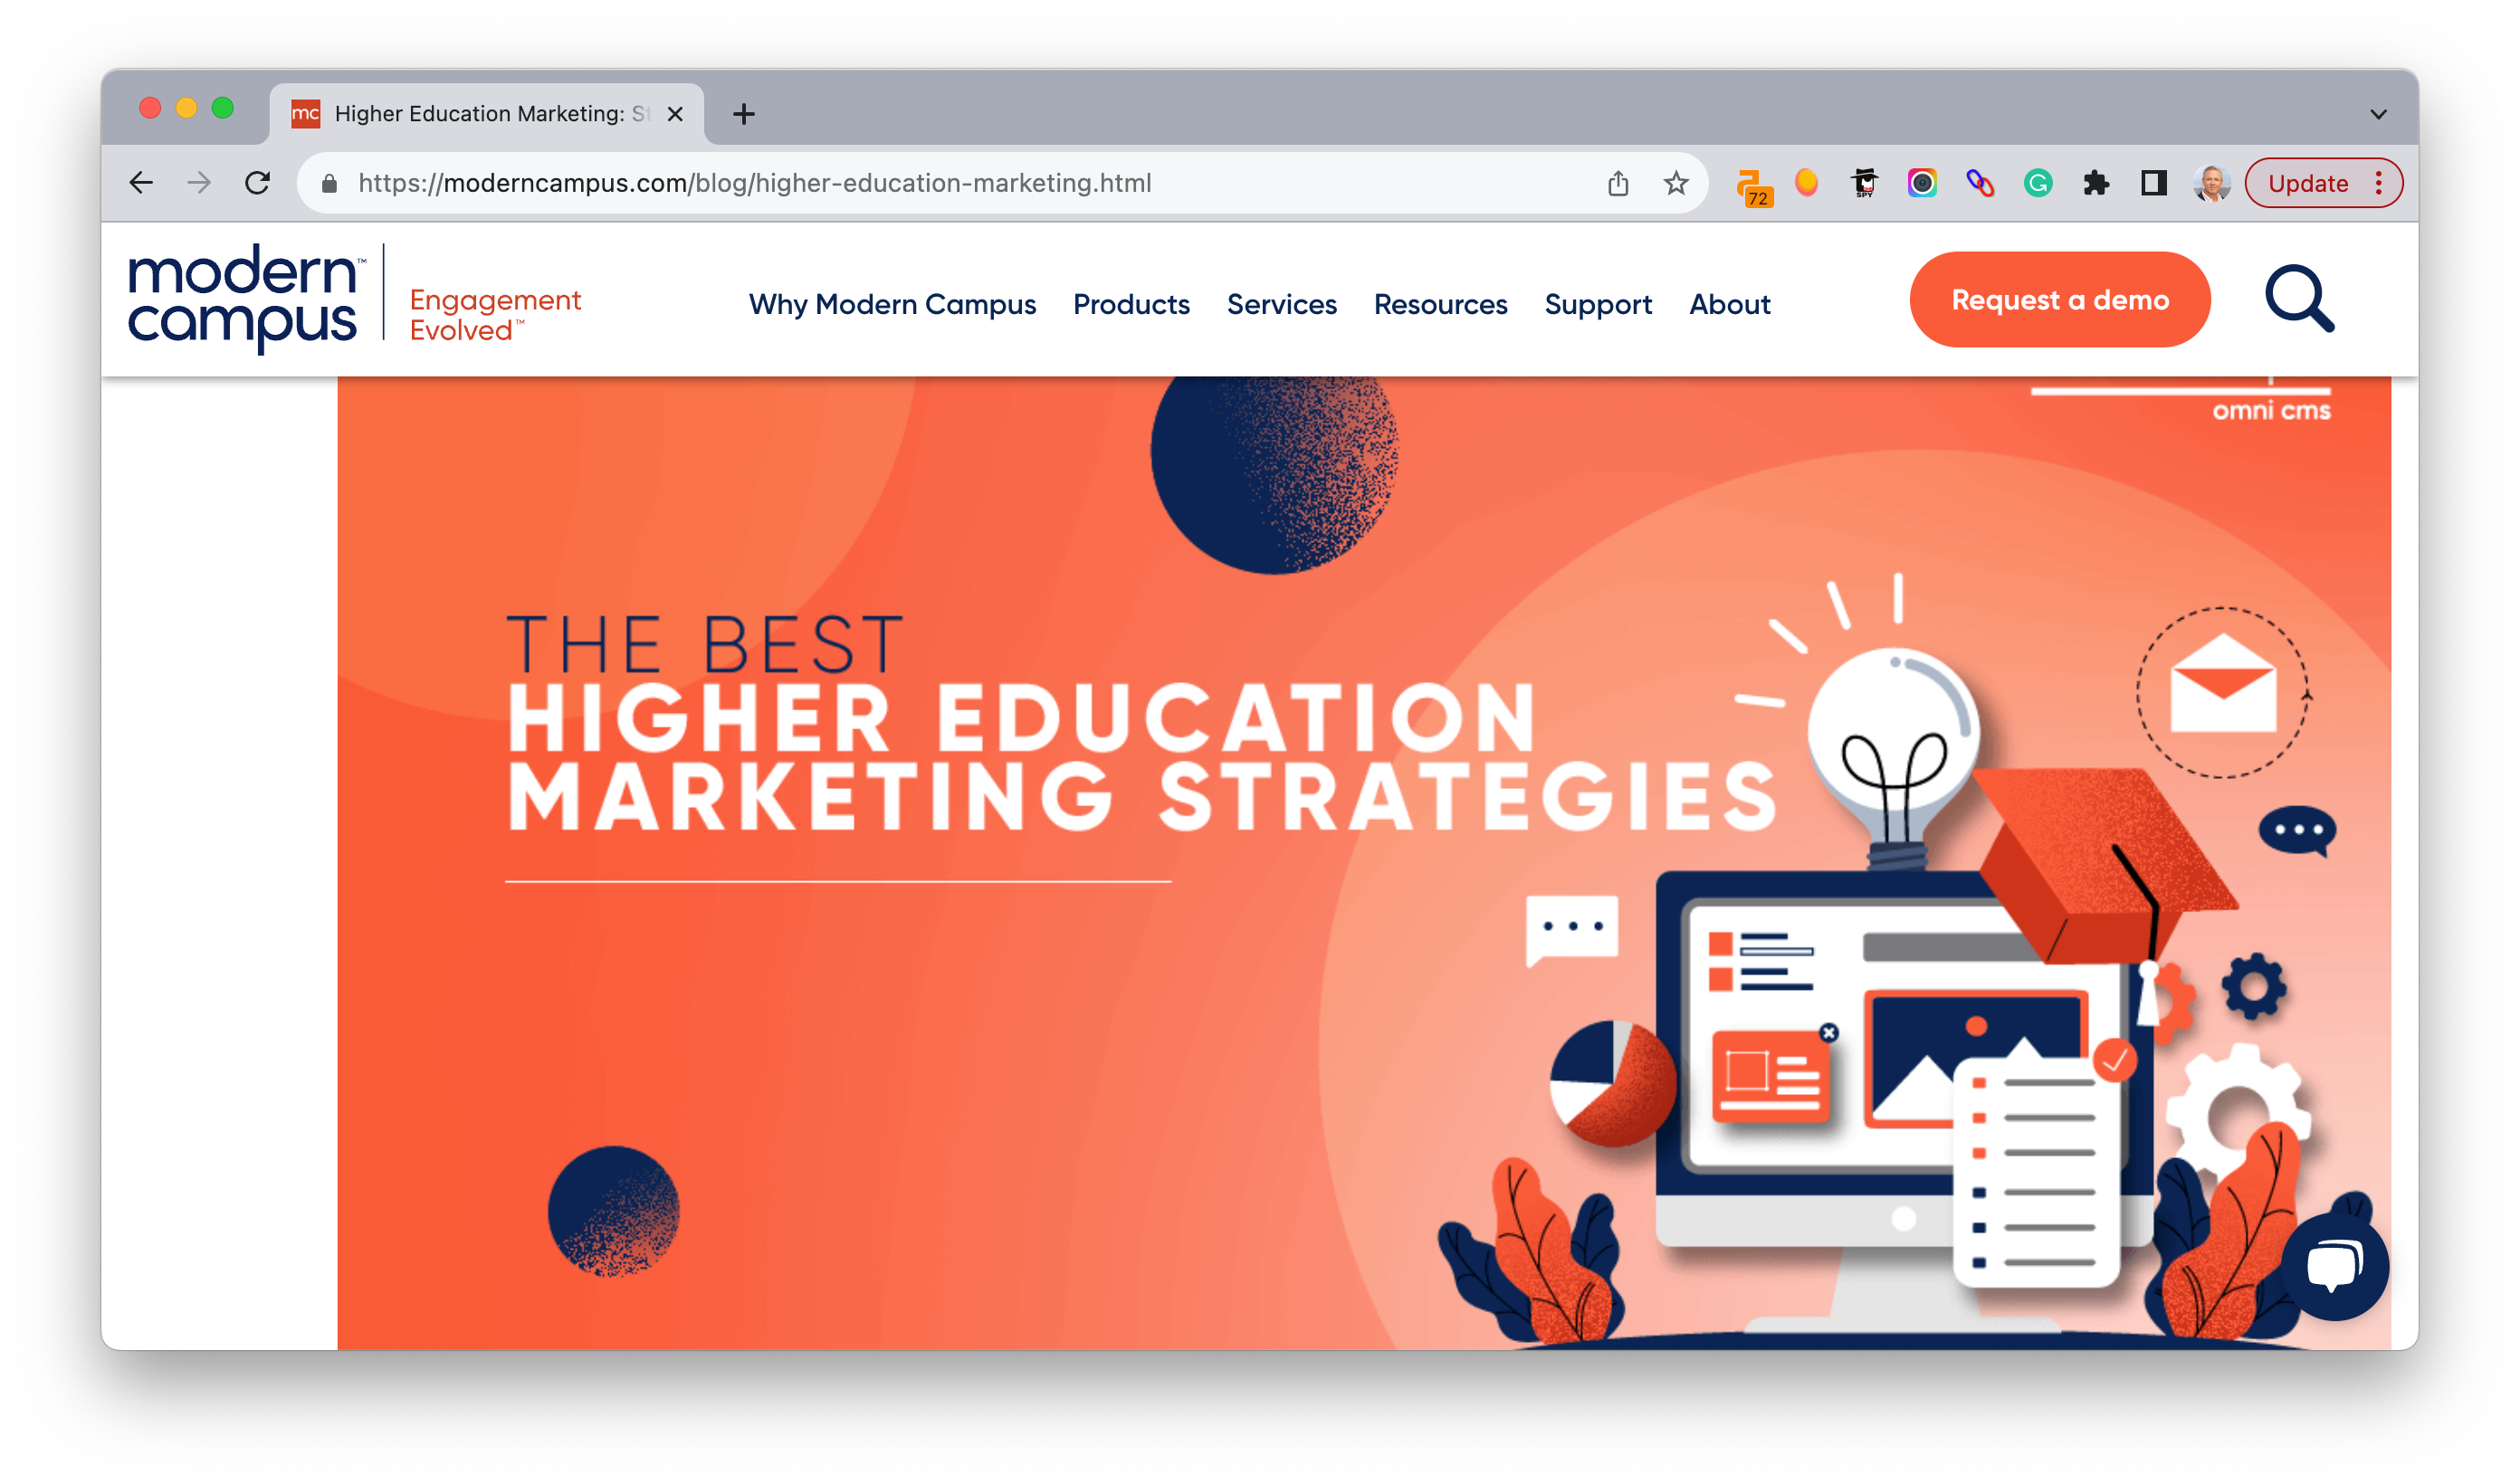 Higher Education Marketing - Strategies and Trends to Know-moderncampus.com-blog-higher-education-marketing